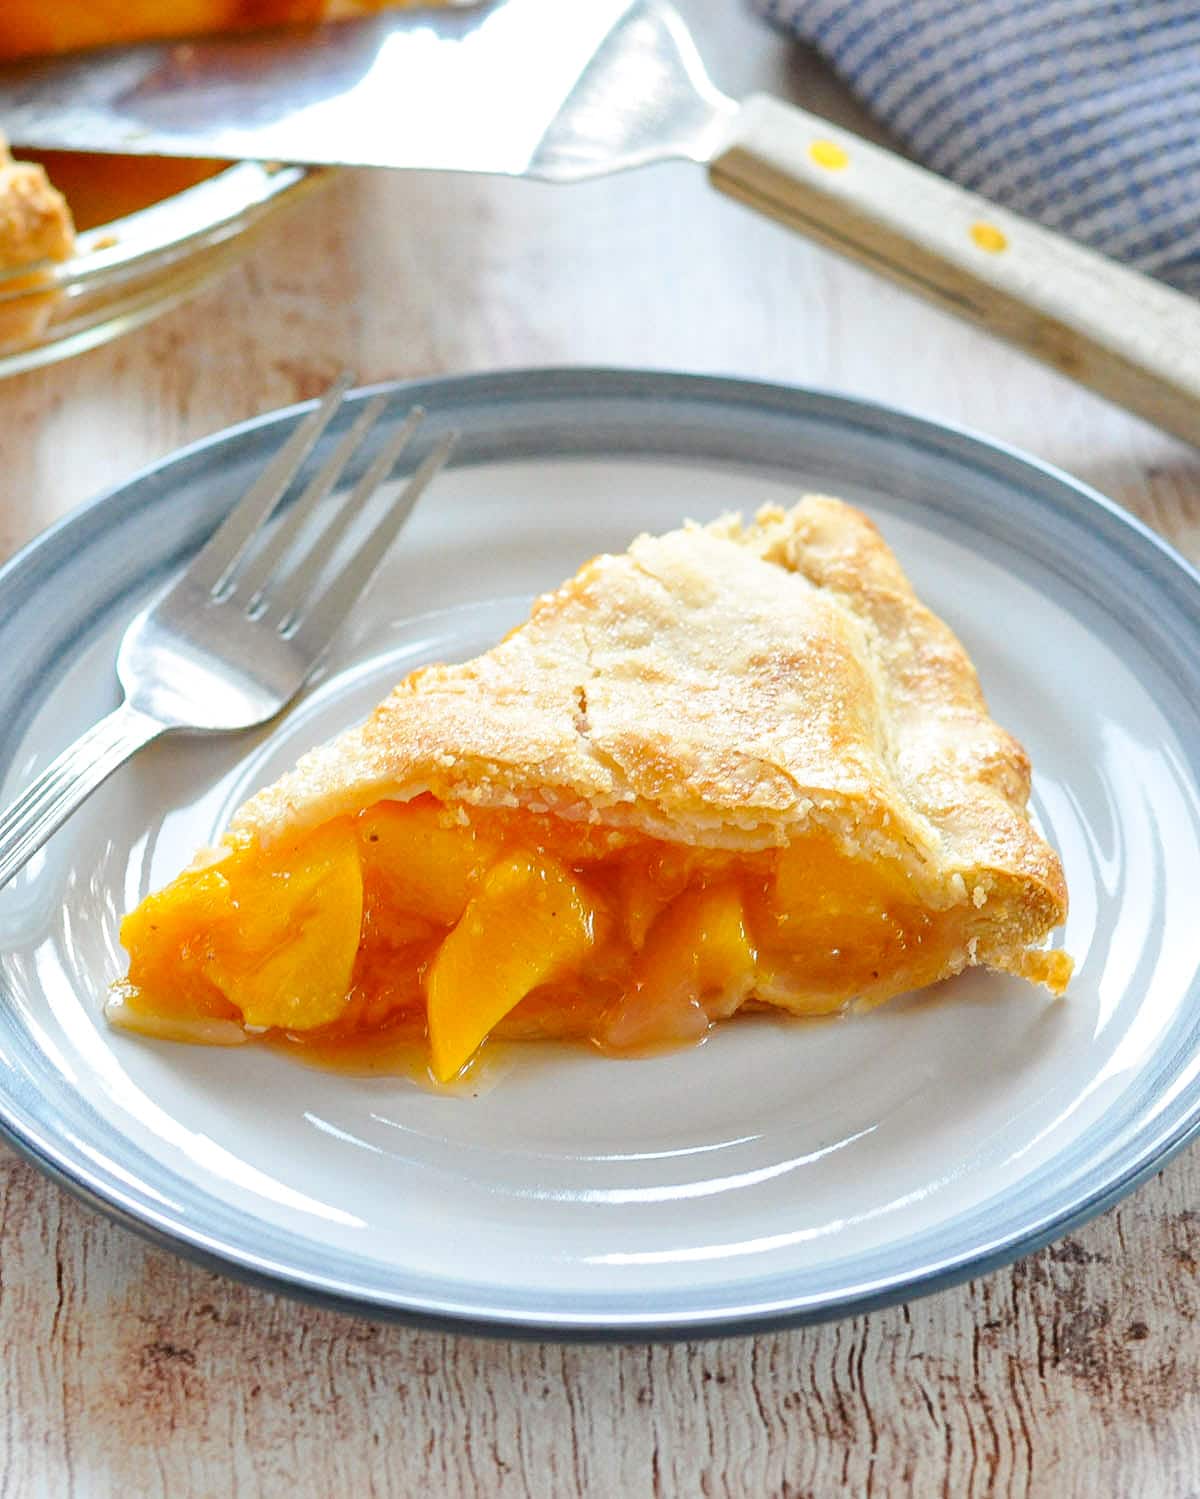 a slice of peach pie on a white and blue plate